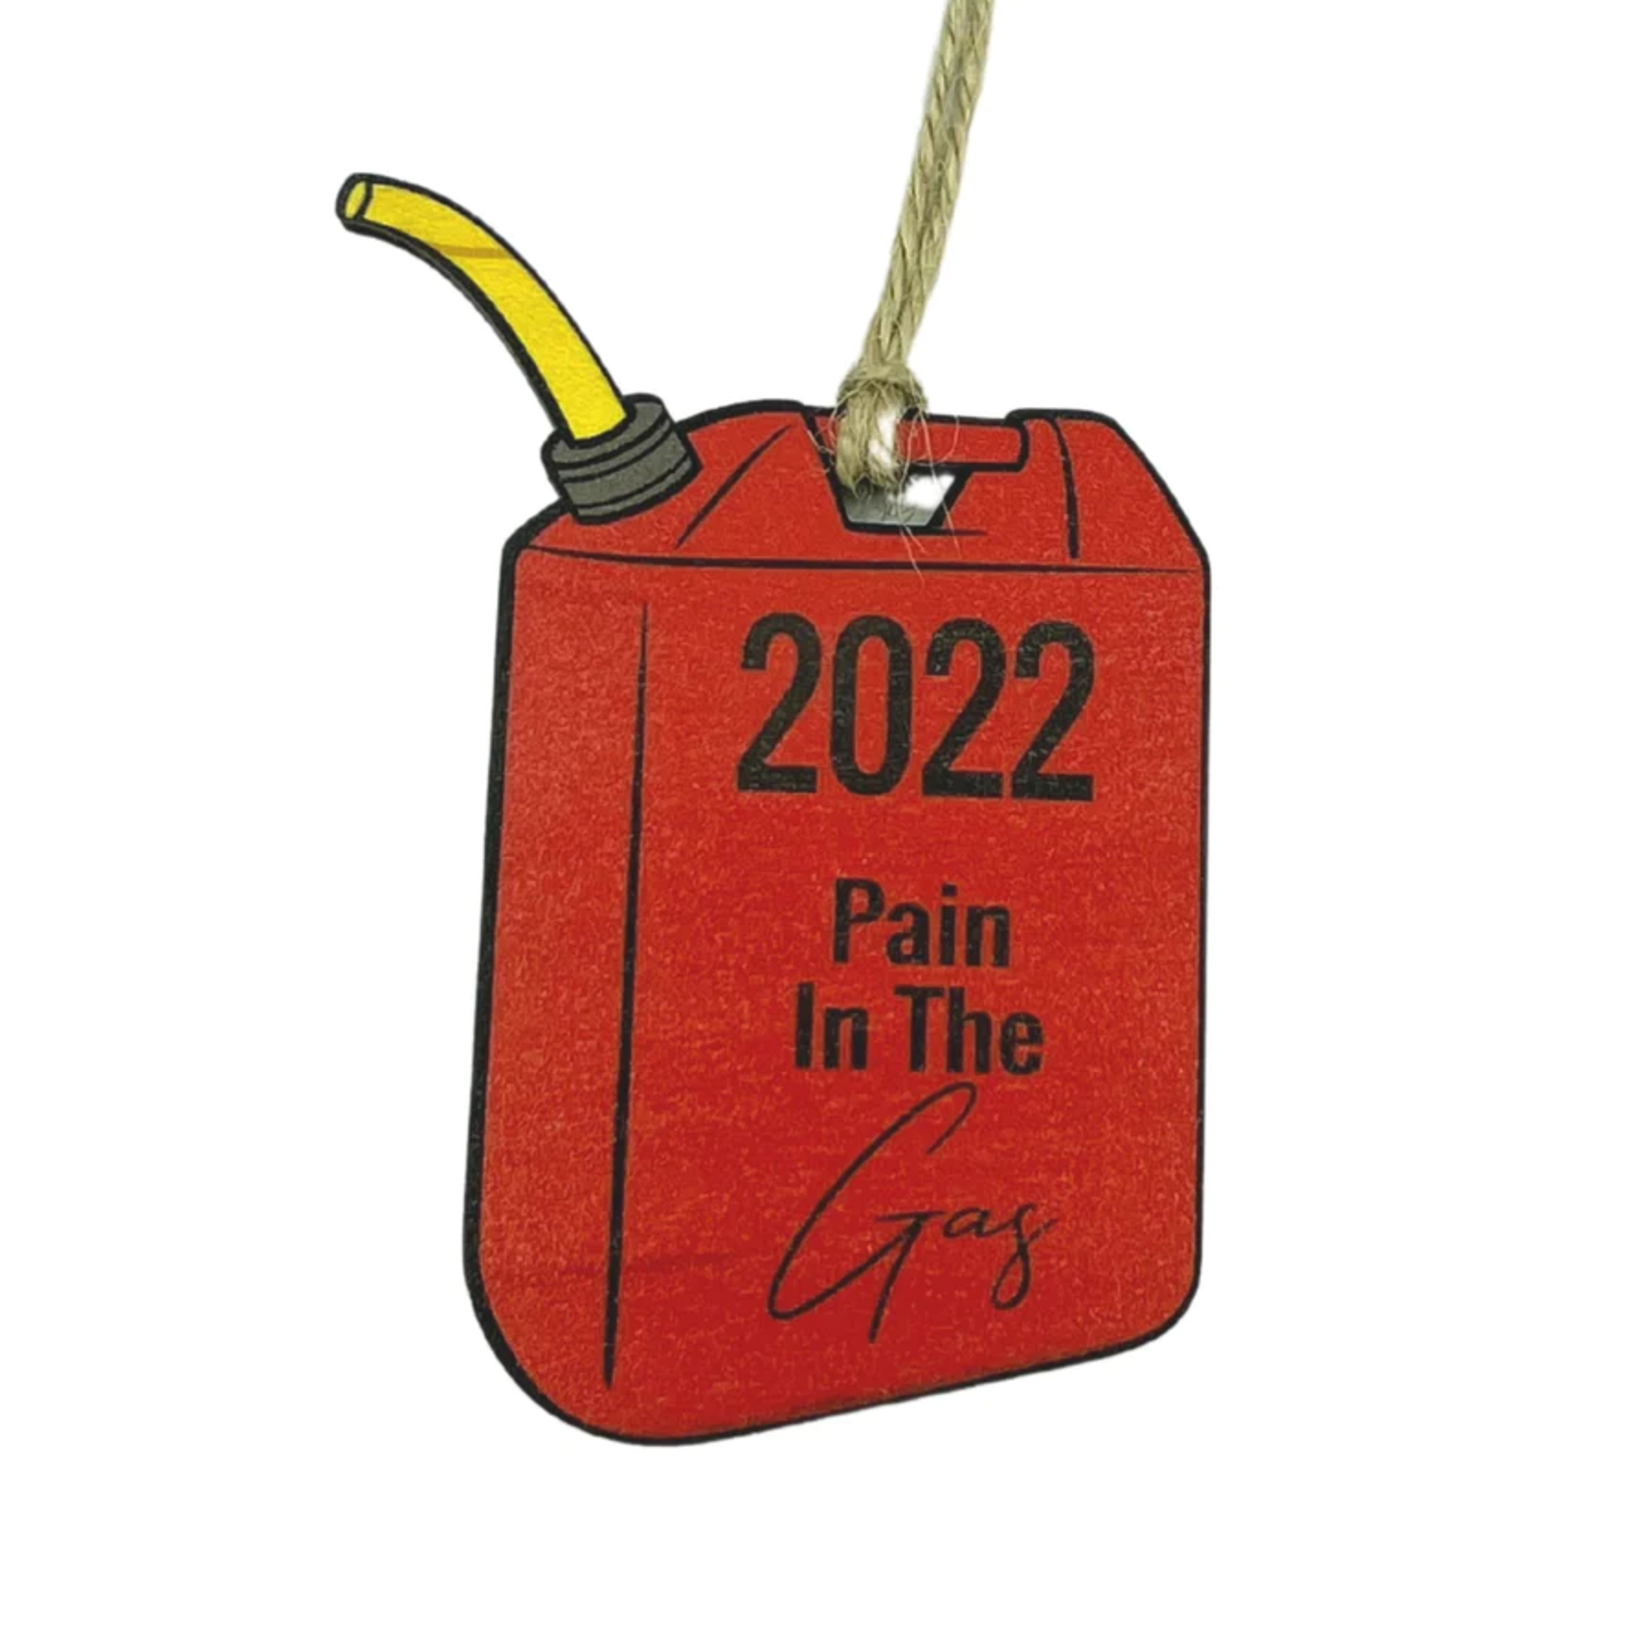 Pain in the Gas 2022 Ornament